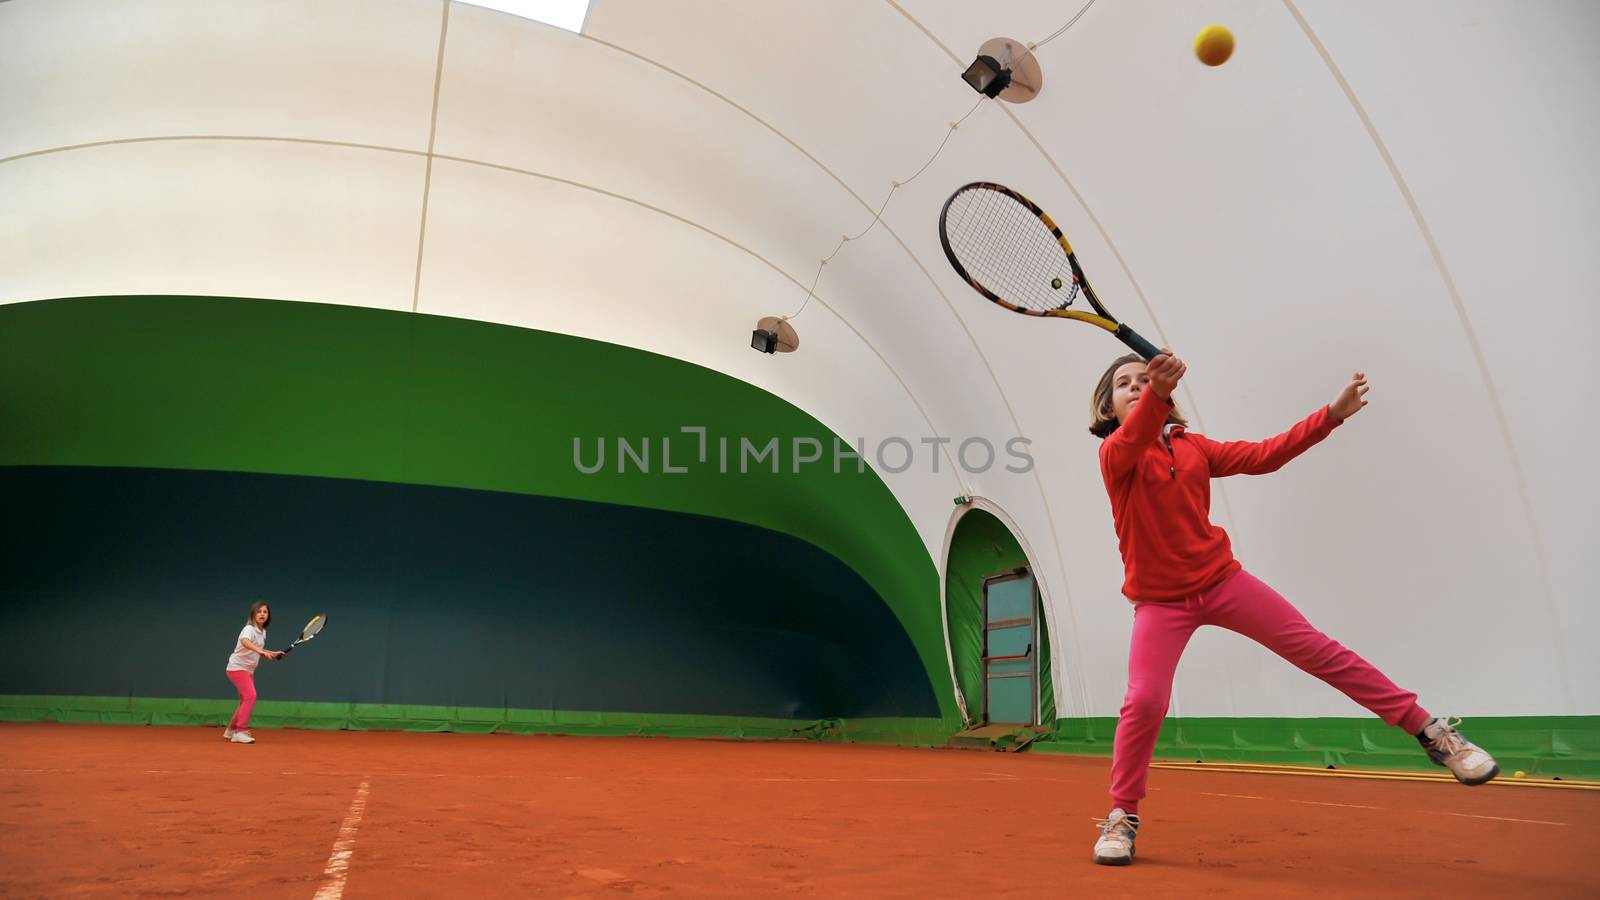 tennis school by giovannicaito